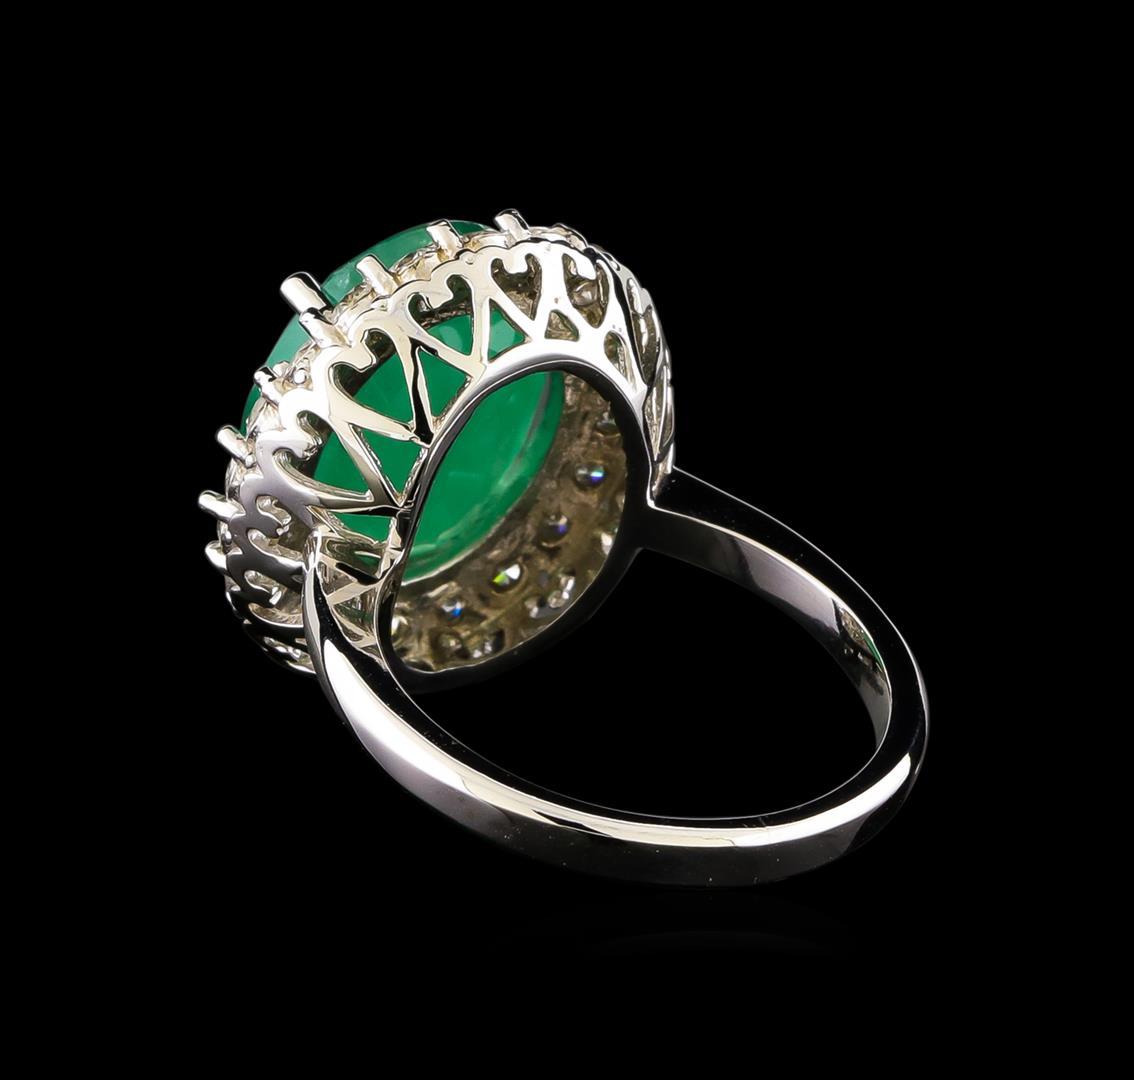 14KT White Gold 5.95 ctw Emerald and Diamond Ring